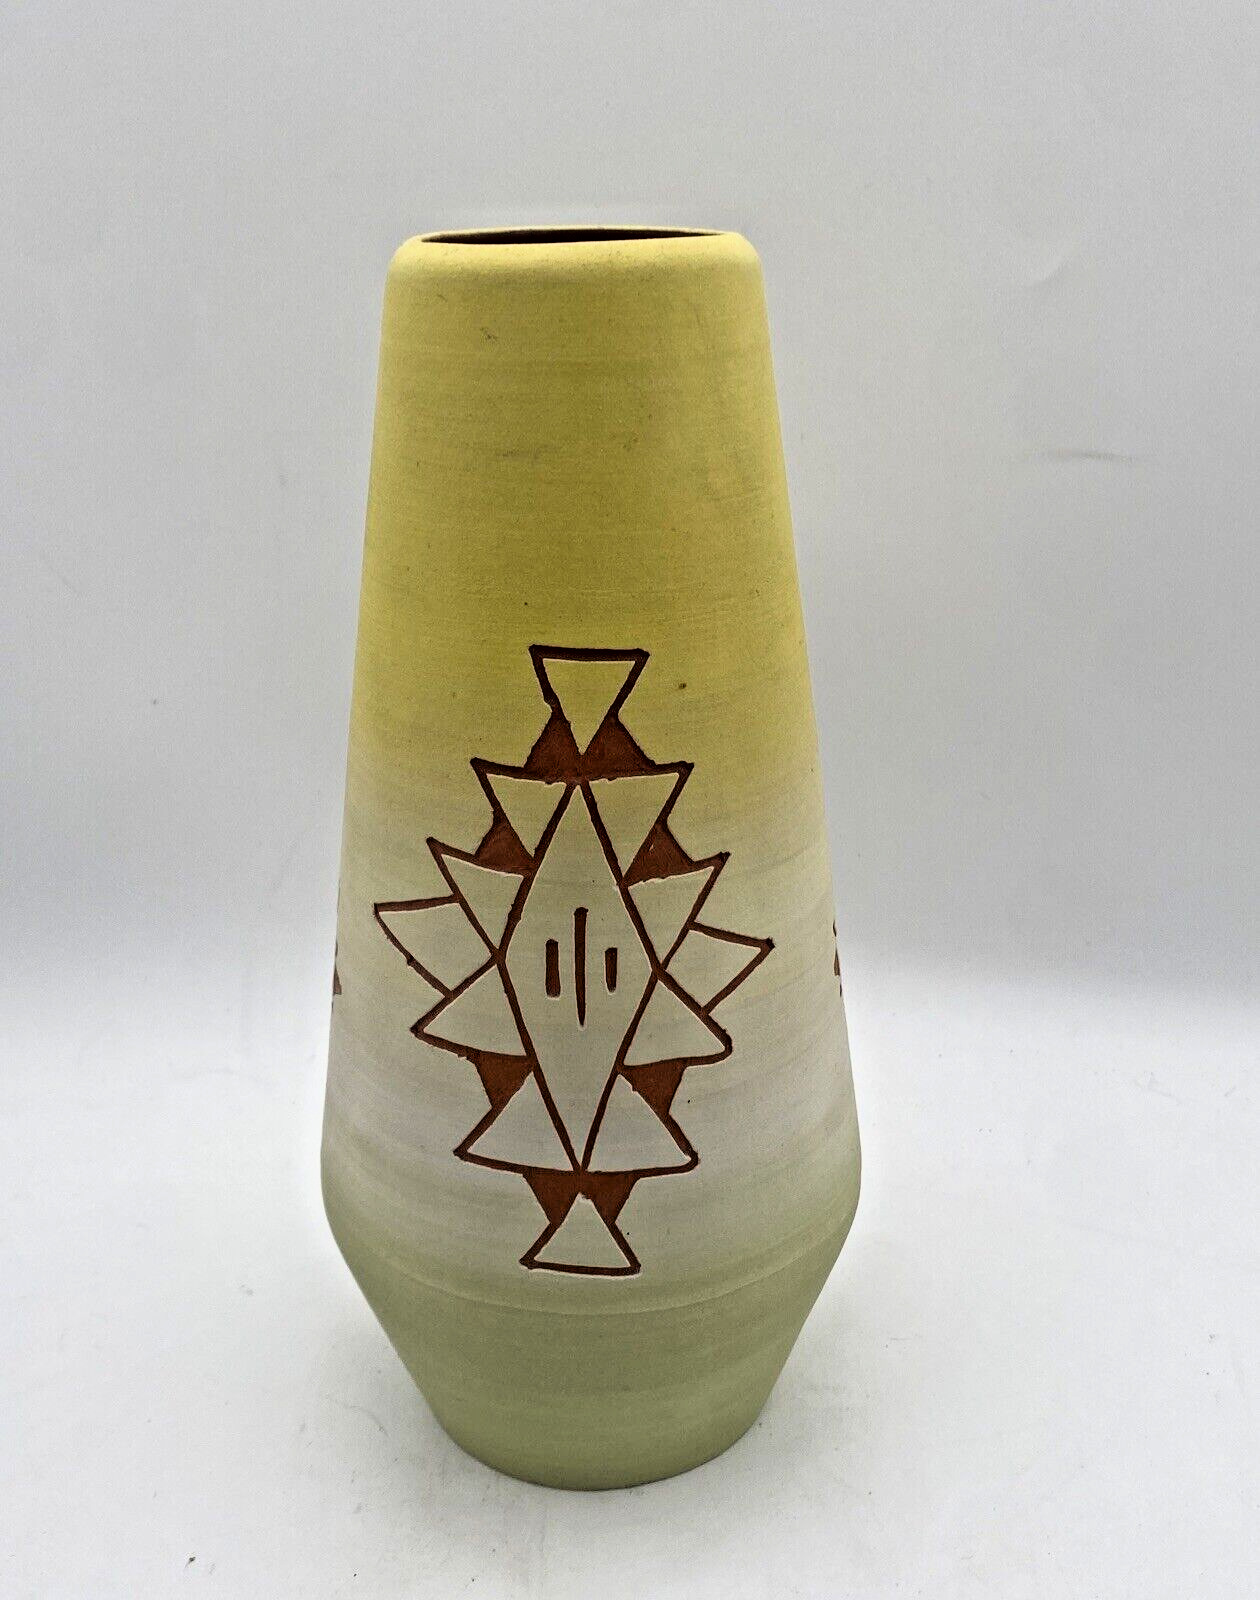 Vintage Sioux Indian Clay Pottery Vase Signed Larvie  SPRC South Dakota